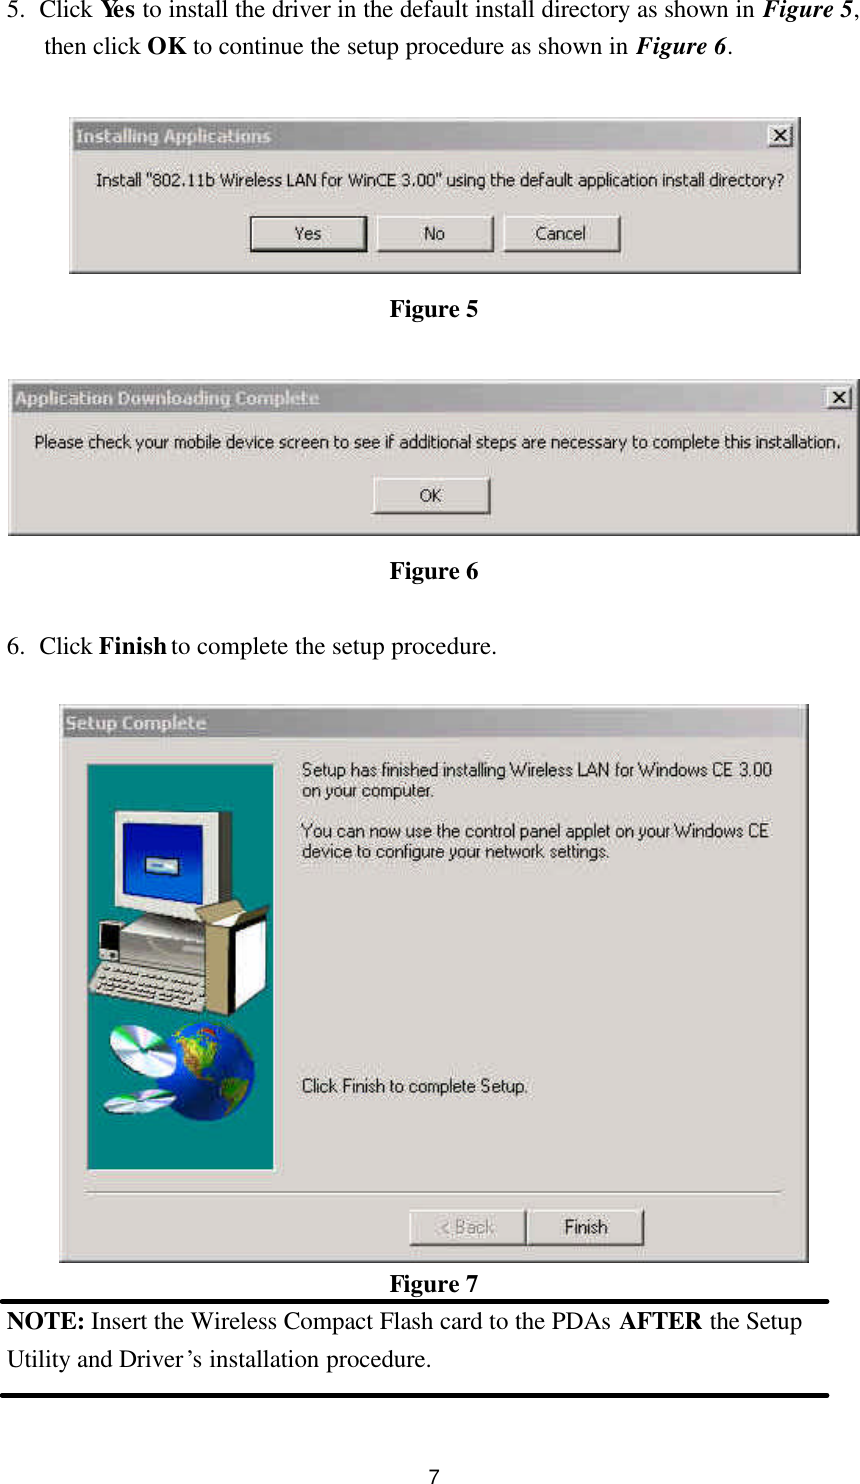  7 5. Click Yes to install the driver in the default install directory as shown in Figure 5, then click OK to continue the setup procedure as shown in Figure 6.   Figure 5   Figure 6  6. Click Finish to complete the setup procedure.   Figure 7 NOTE: Insert the Wireless Compact Flash card to the PDAs AFTER the Setup Utility and Driver’s installation procedure.  